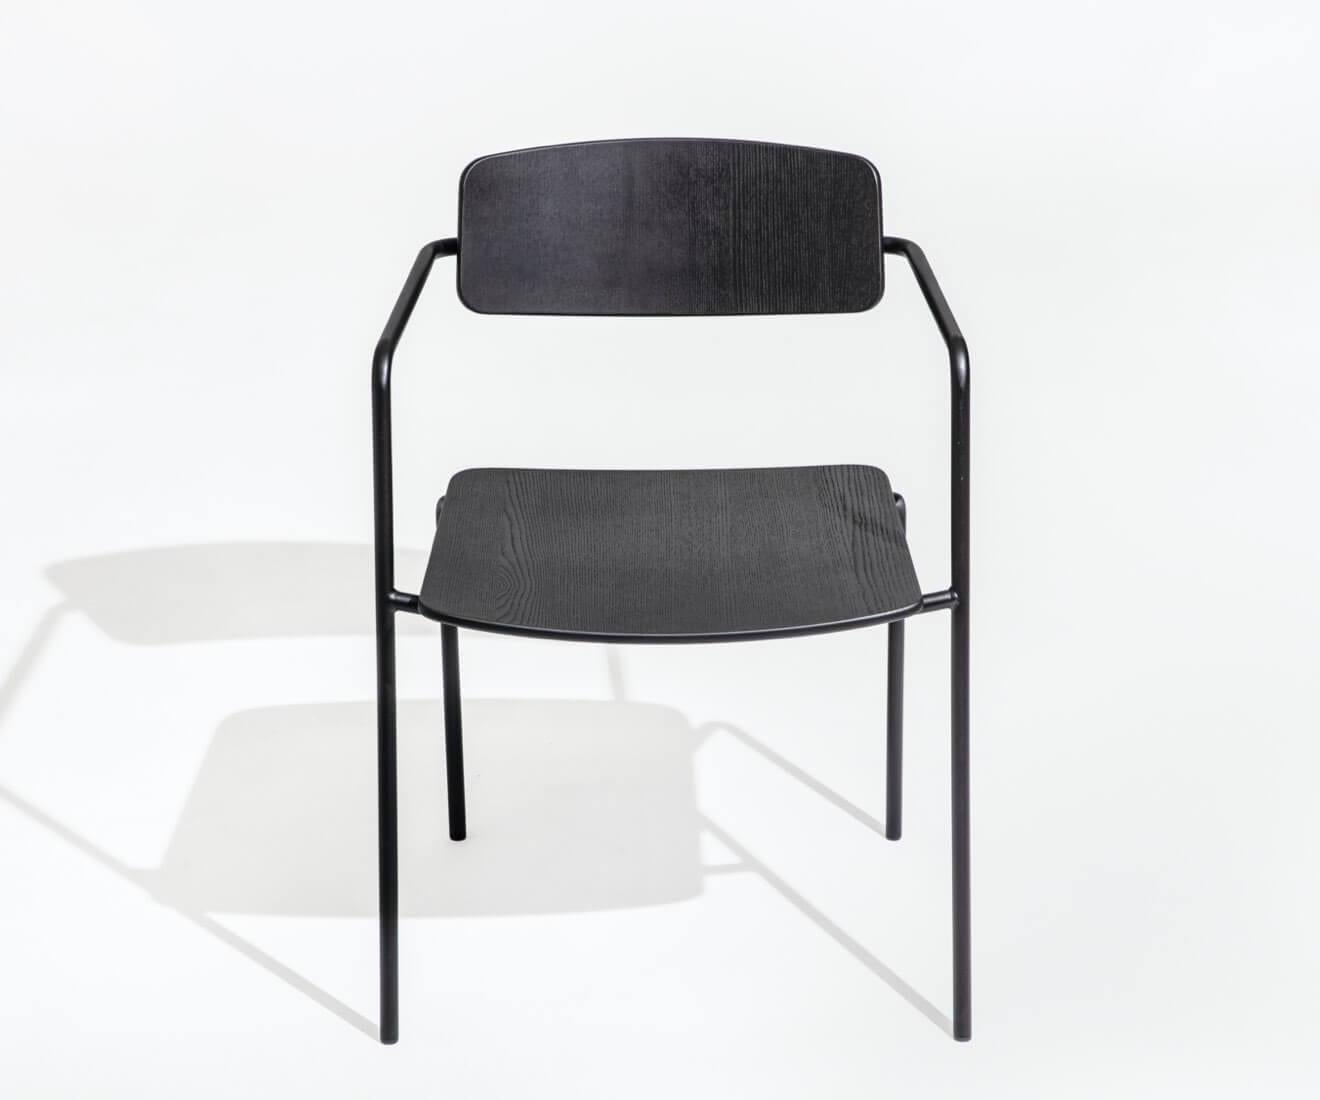 FLOAT is a dining chair, with an open back giving a gentle flexibility and comfort. The design and functionality make FLOAT suitable in several room types and settings including restaurants as it is stackable by four.

A simple and gently curved